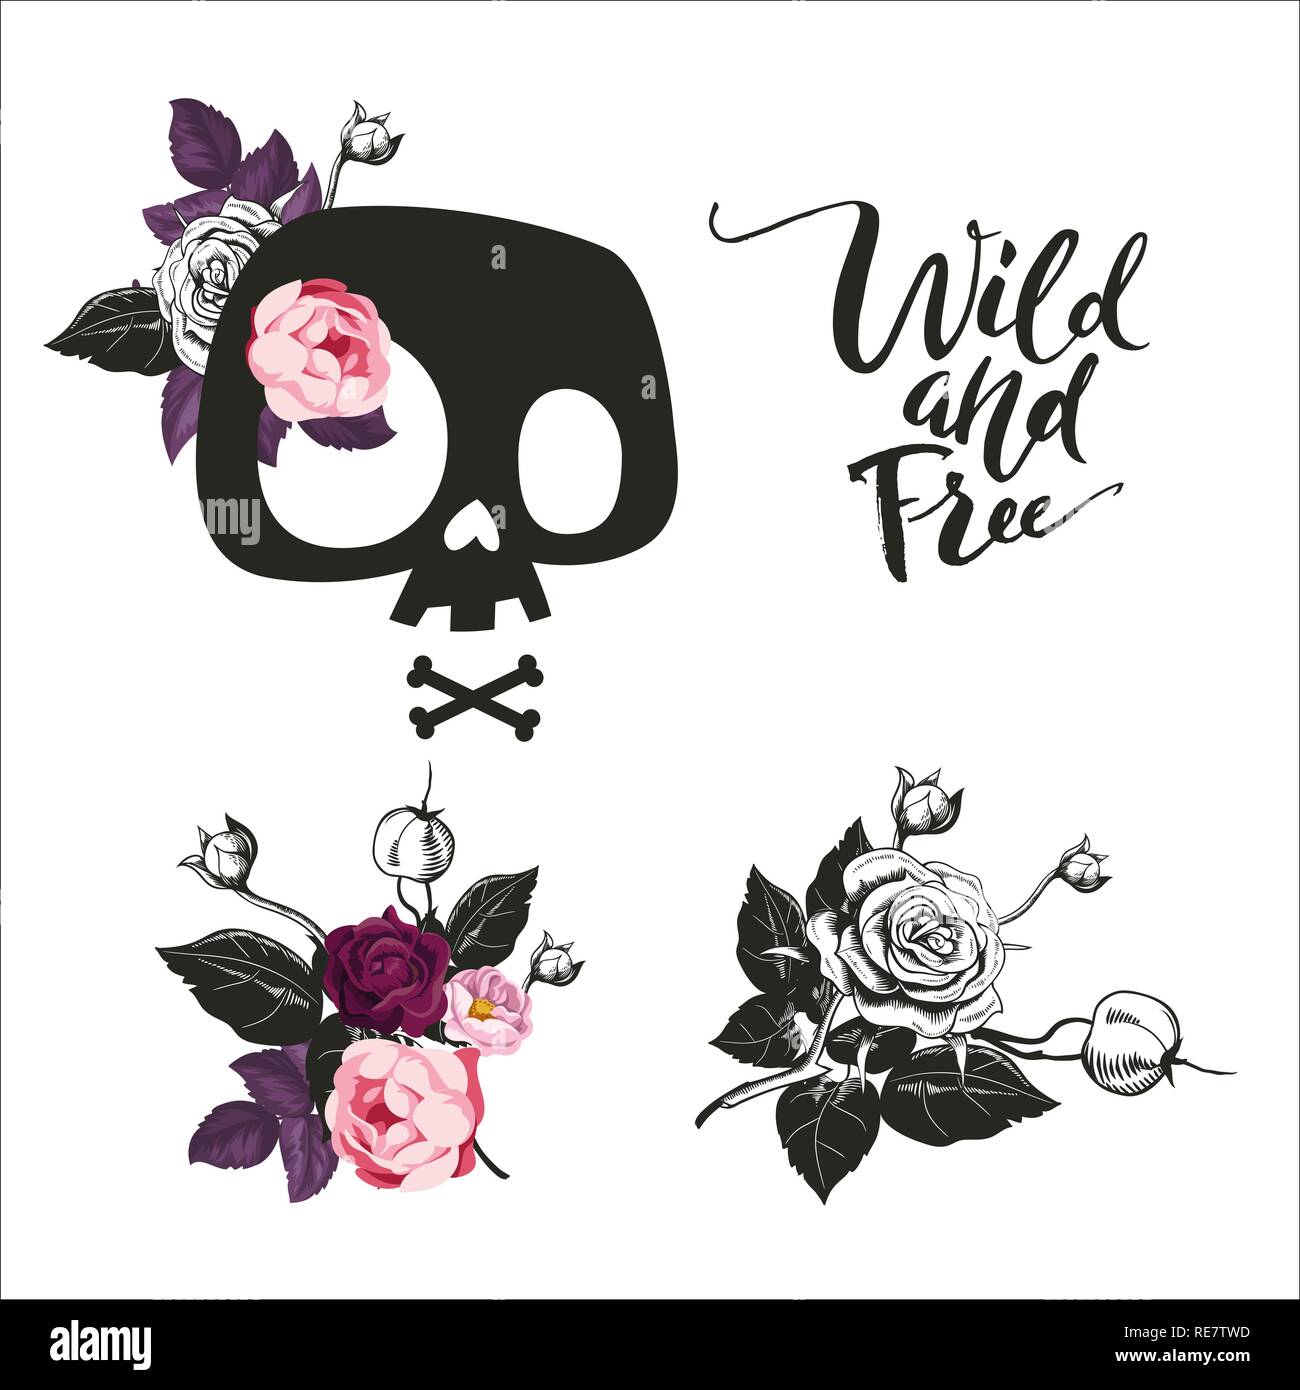 Set of Cute Cartoon Skull decorated with rose flowers, bouquets, skull sign, Wild and Free Lettering, Can be used as print art, t-shirt print, design. Vector illustration. Isolated. Stock Vector